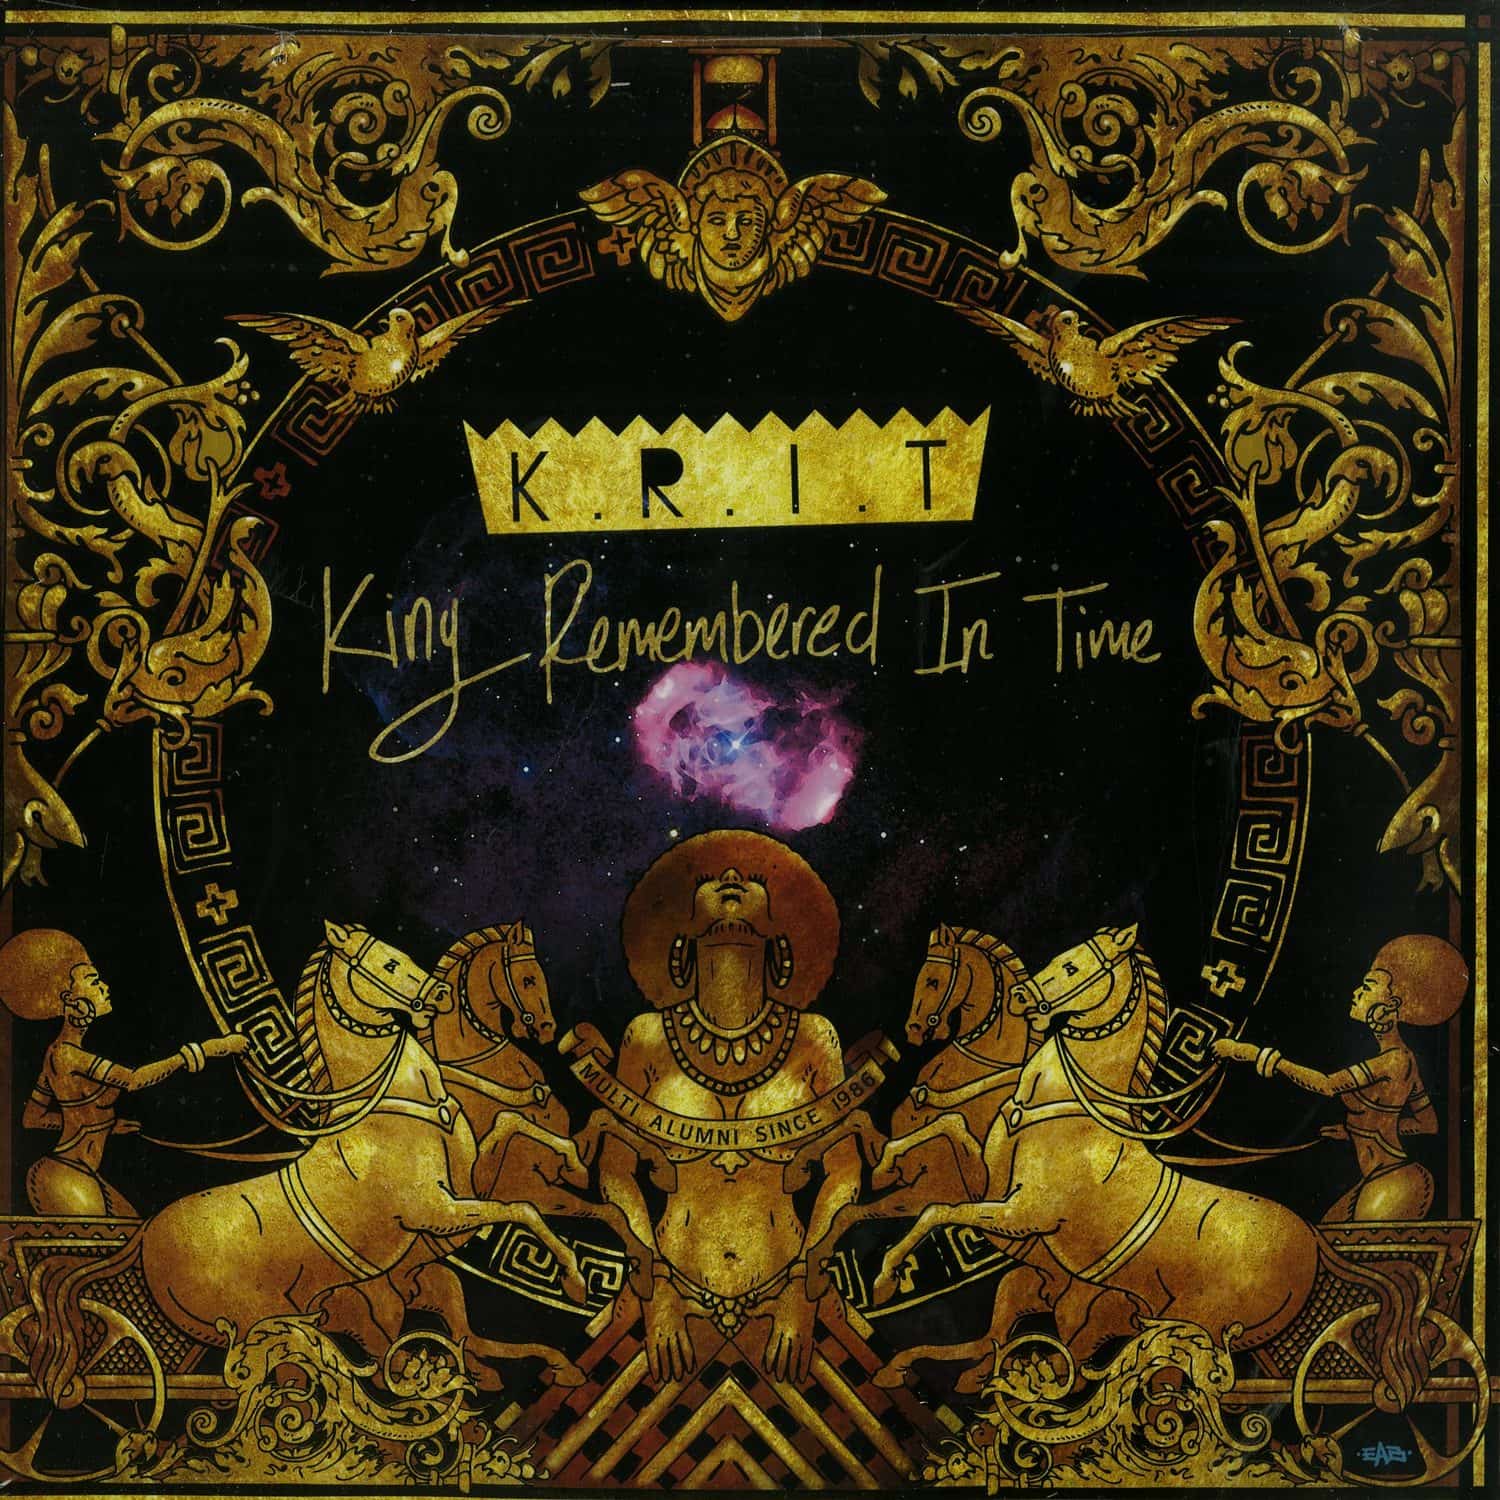 Big K.R.I.T. - KING REMEMBERED IN TIME 